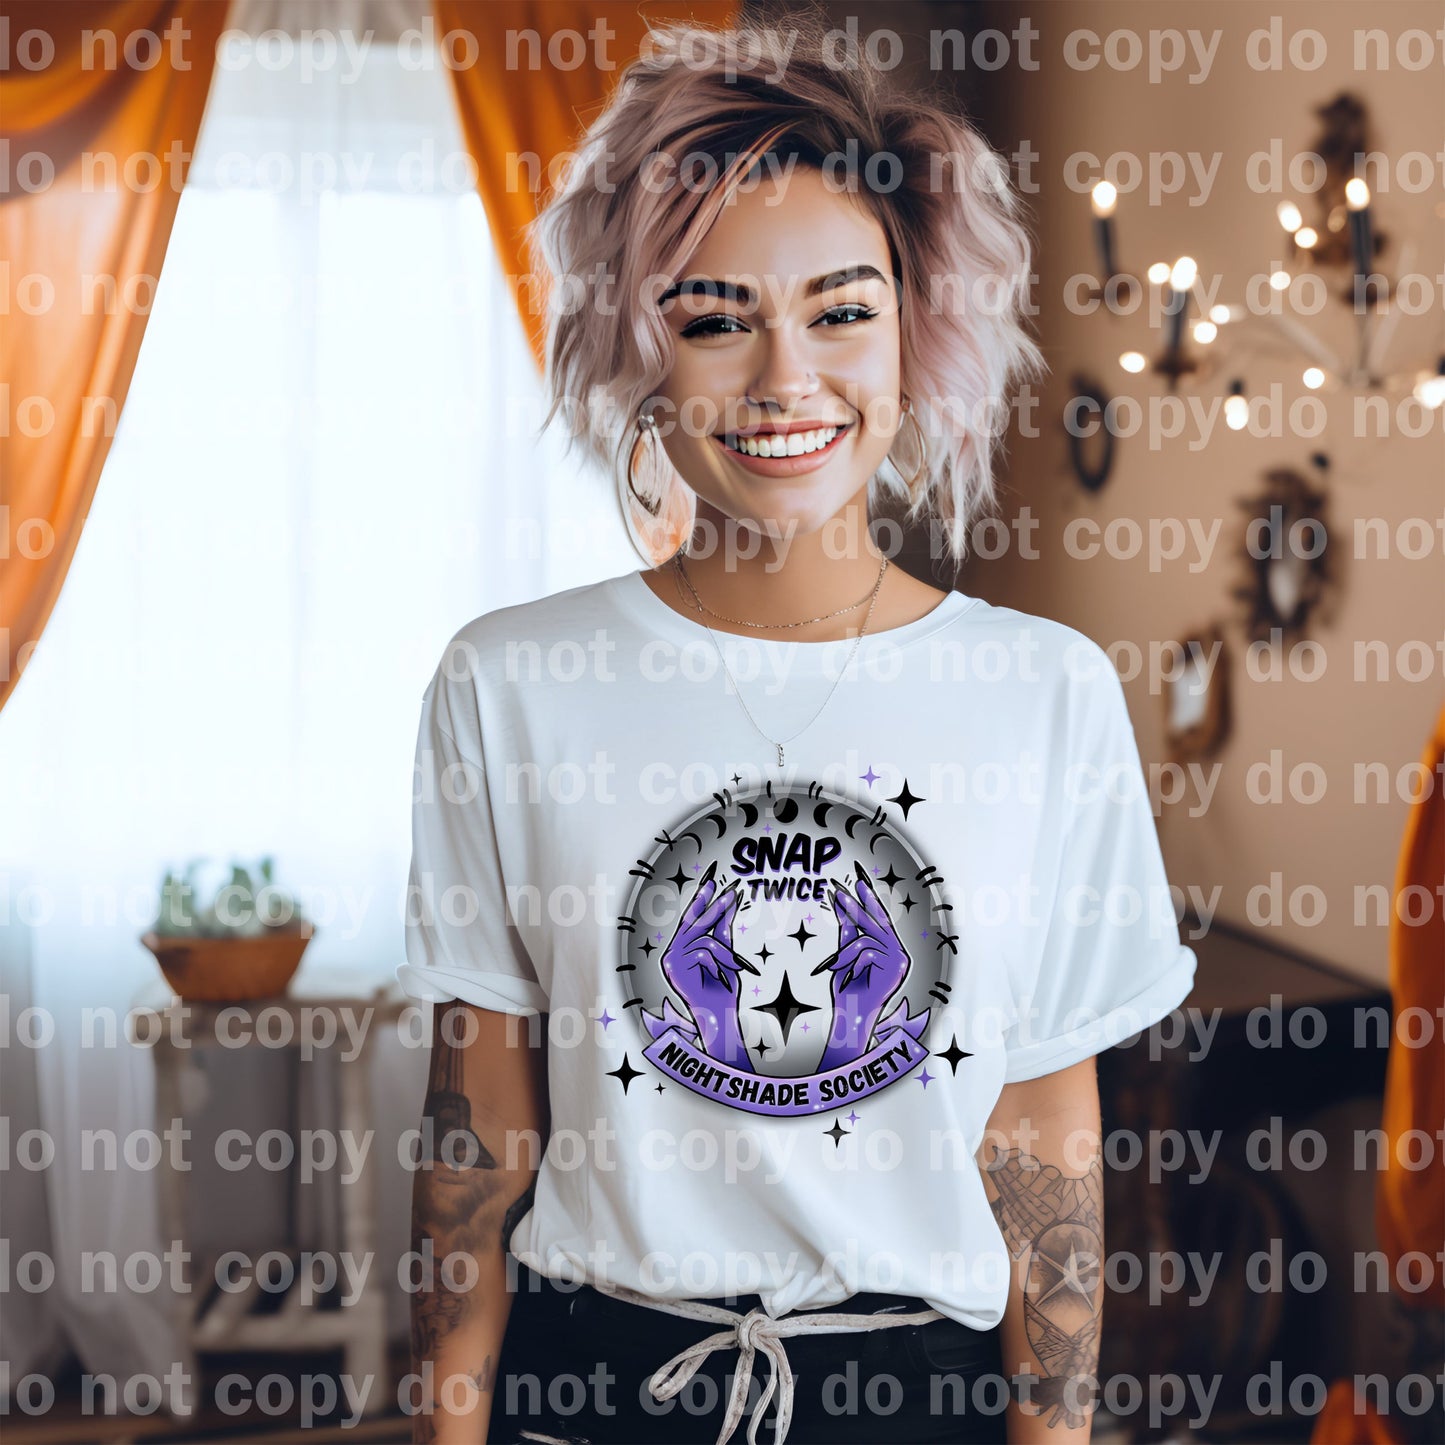 Snap Twice Nightshade Society Dream Print or Sublimation Print